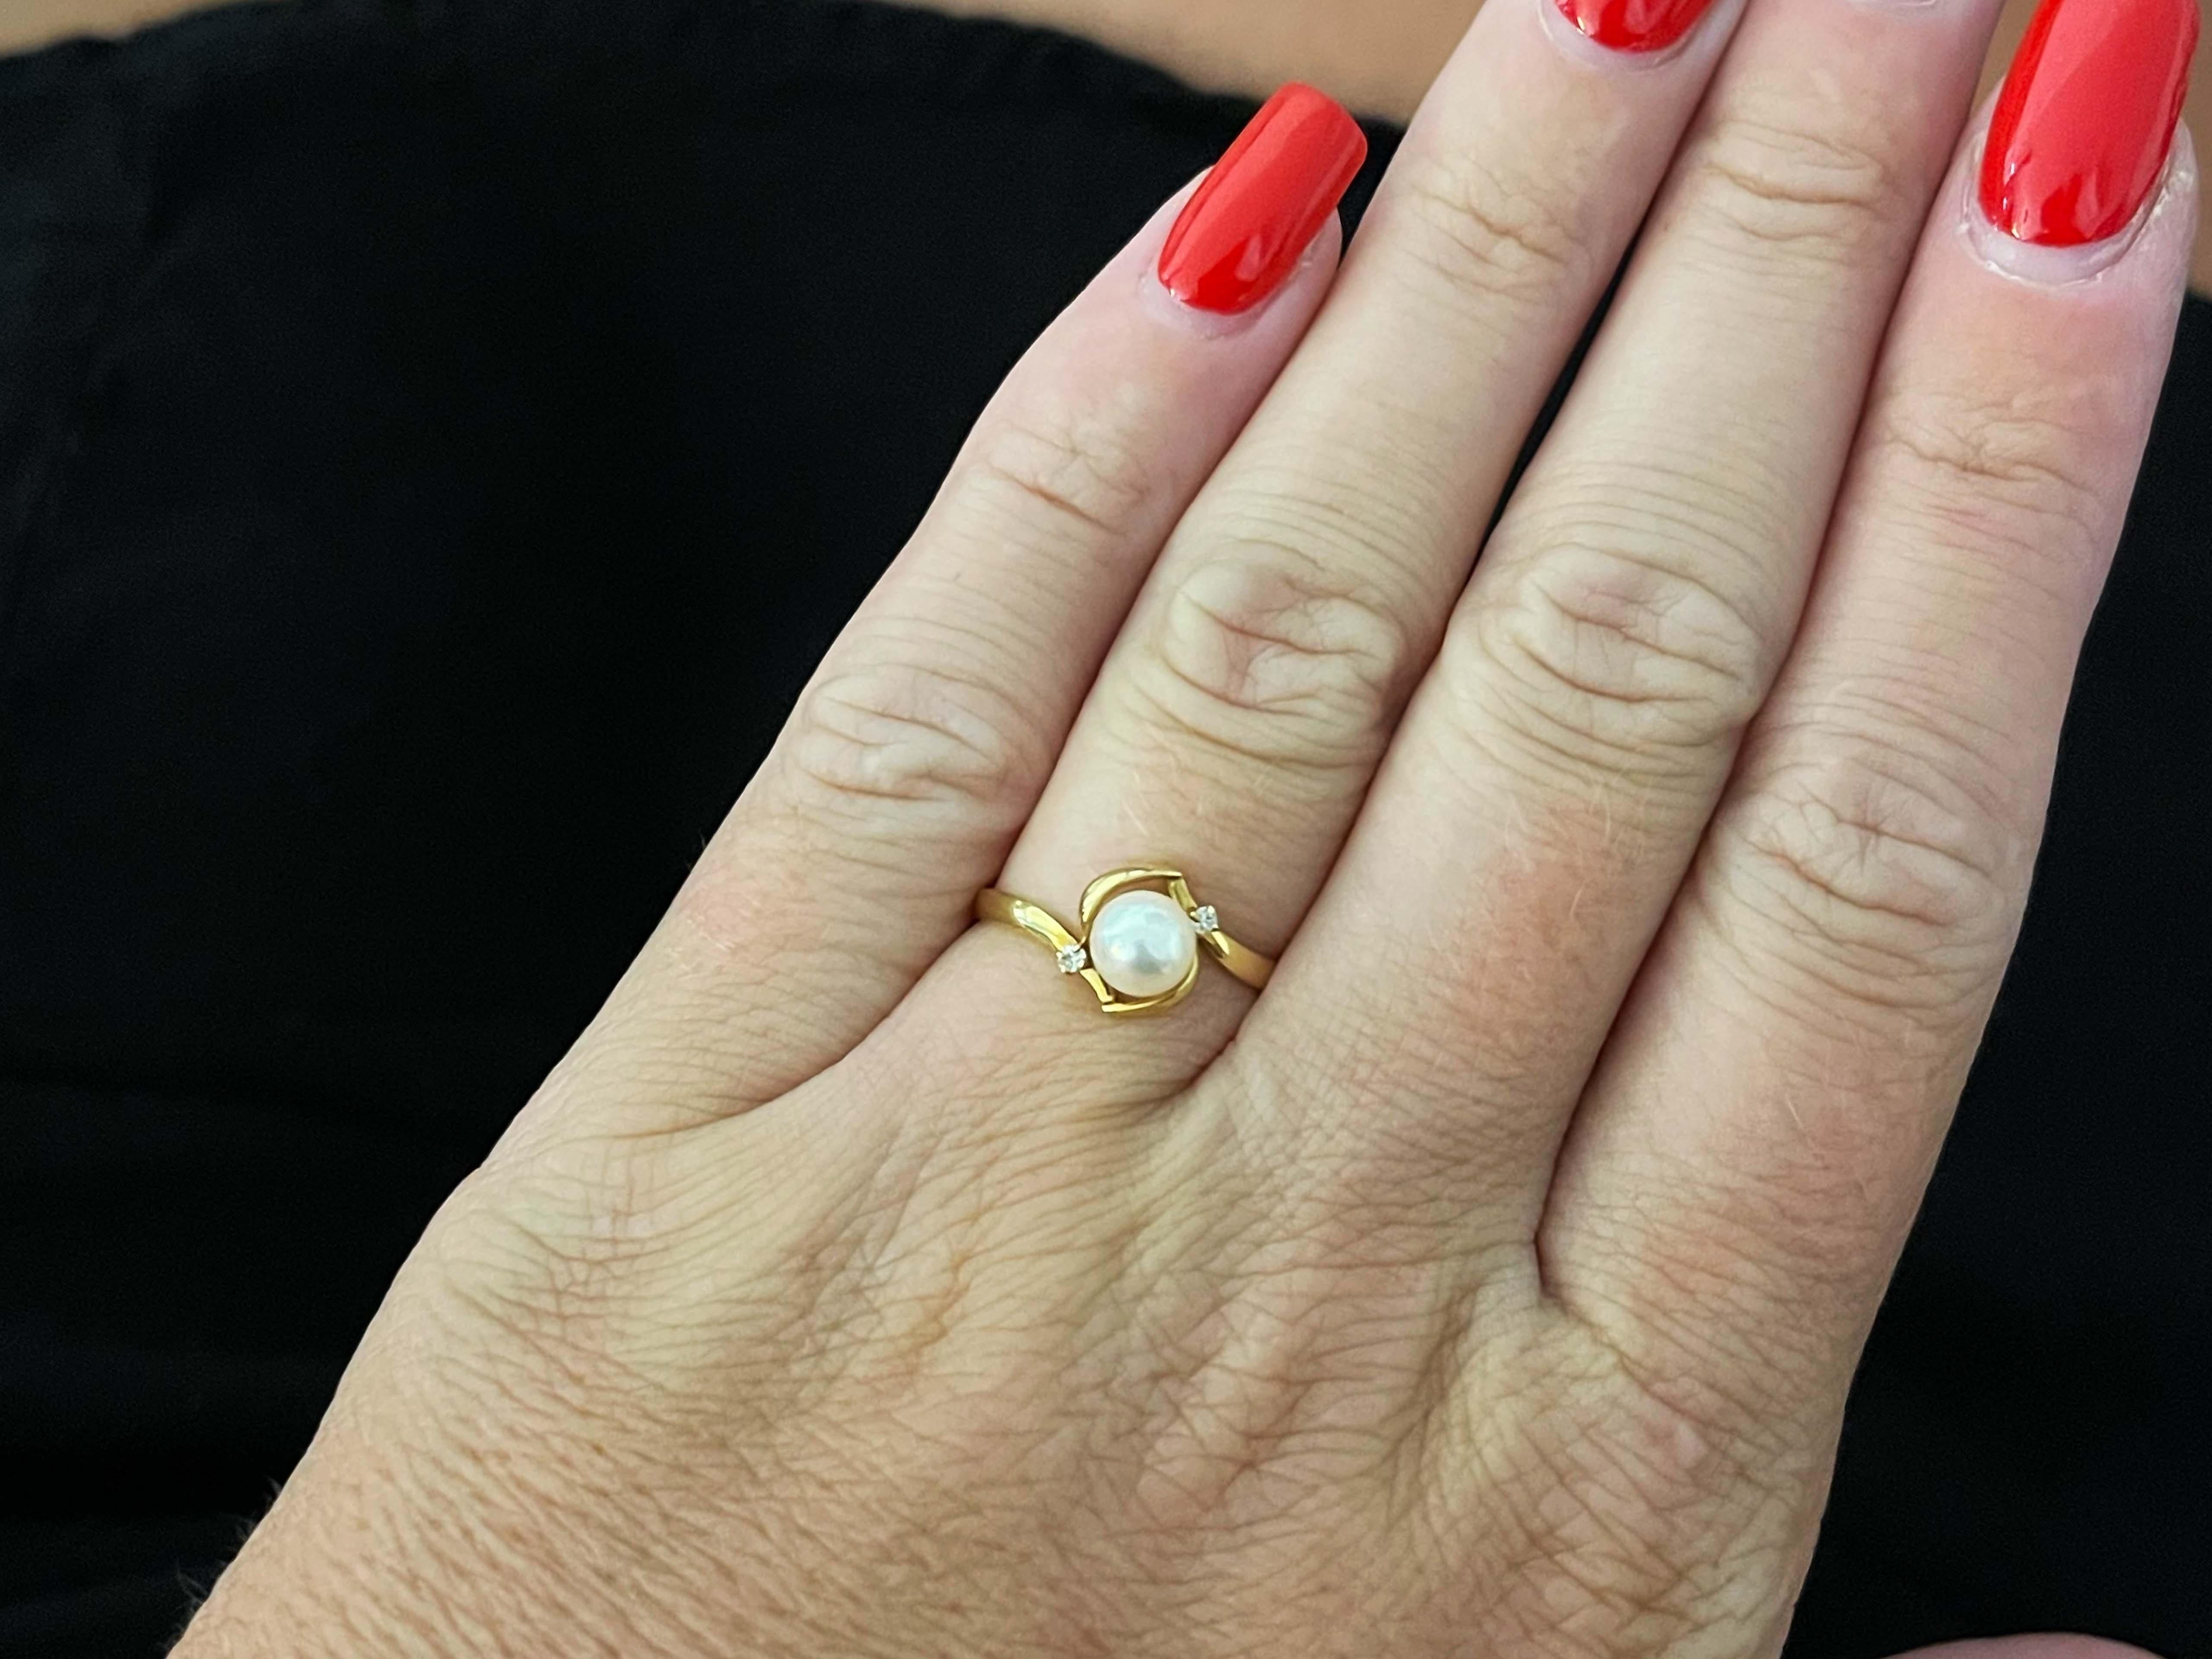 Item Specifications:

Metal: 18K Yellow Gold 

Total Weight: 1.3 Grams

Ring Size: 6.5 (resizable)

Gemstone Specifications:

Center Gemstone: Akoya Pearl

Pearl Diameter: 5.6 mm

Diamond Count: 2 round brilliant cut
​
​Diamond Color: H
​
​Diamond